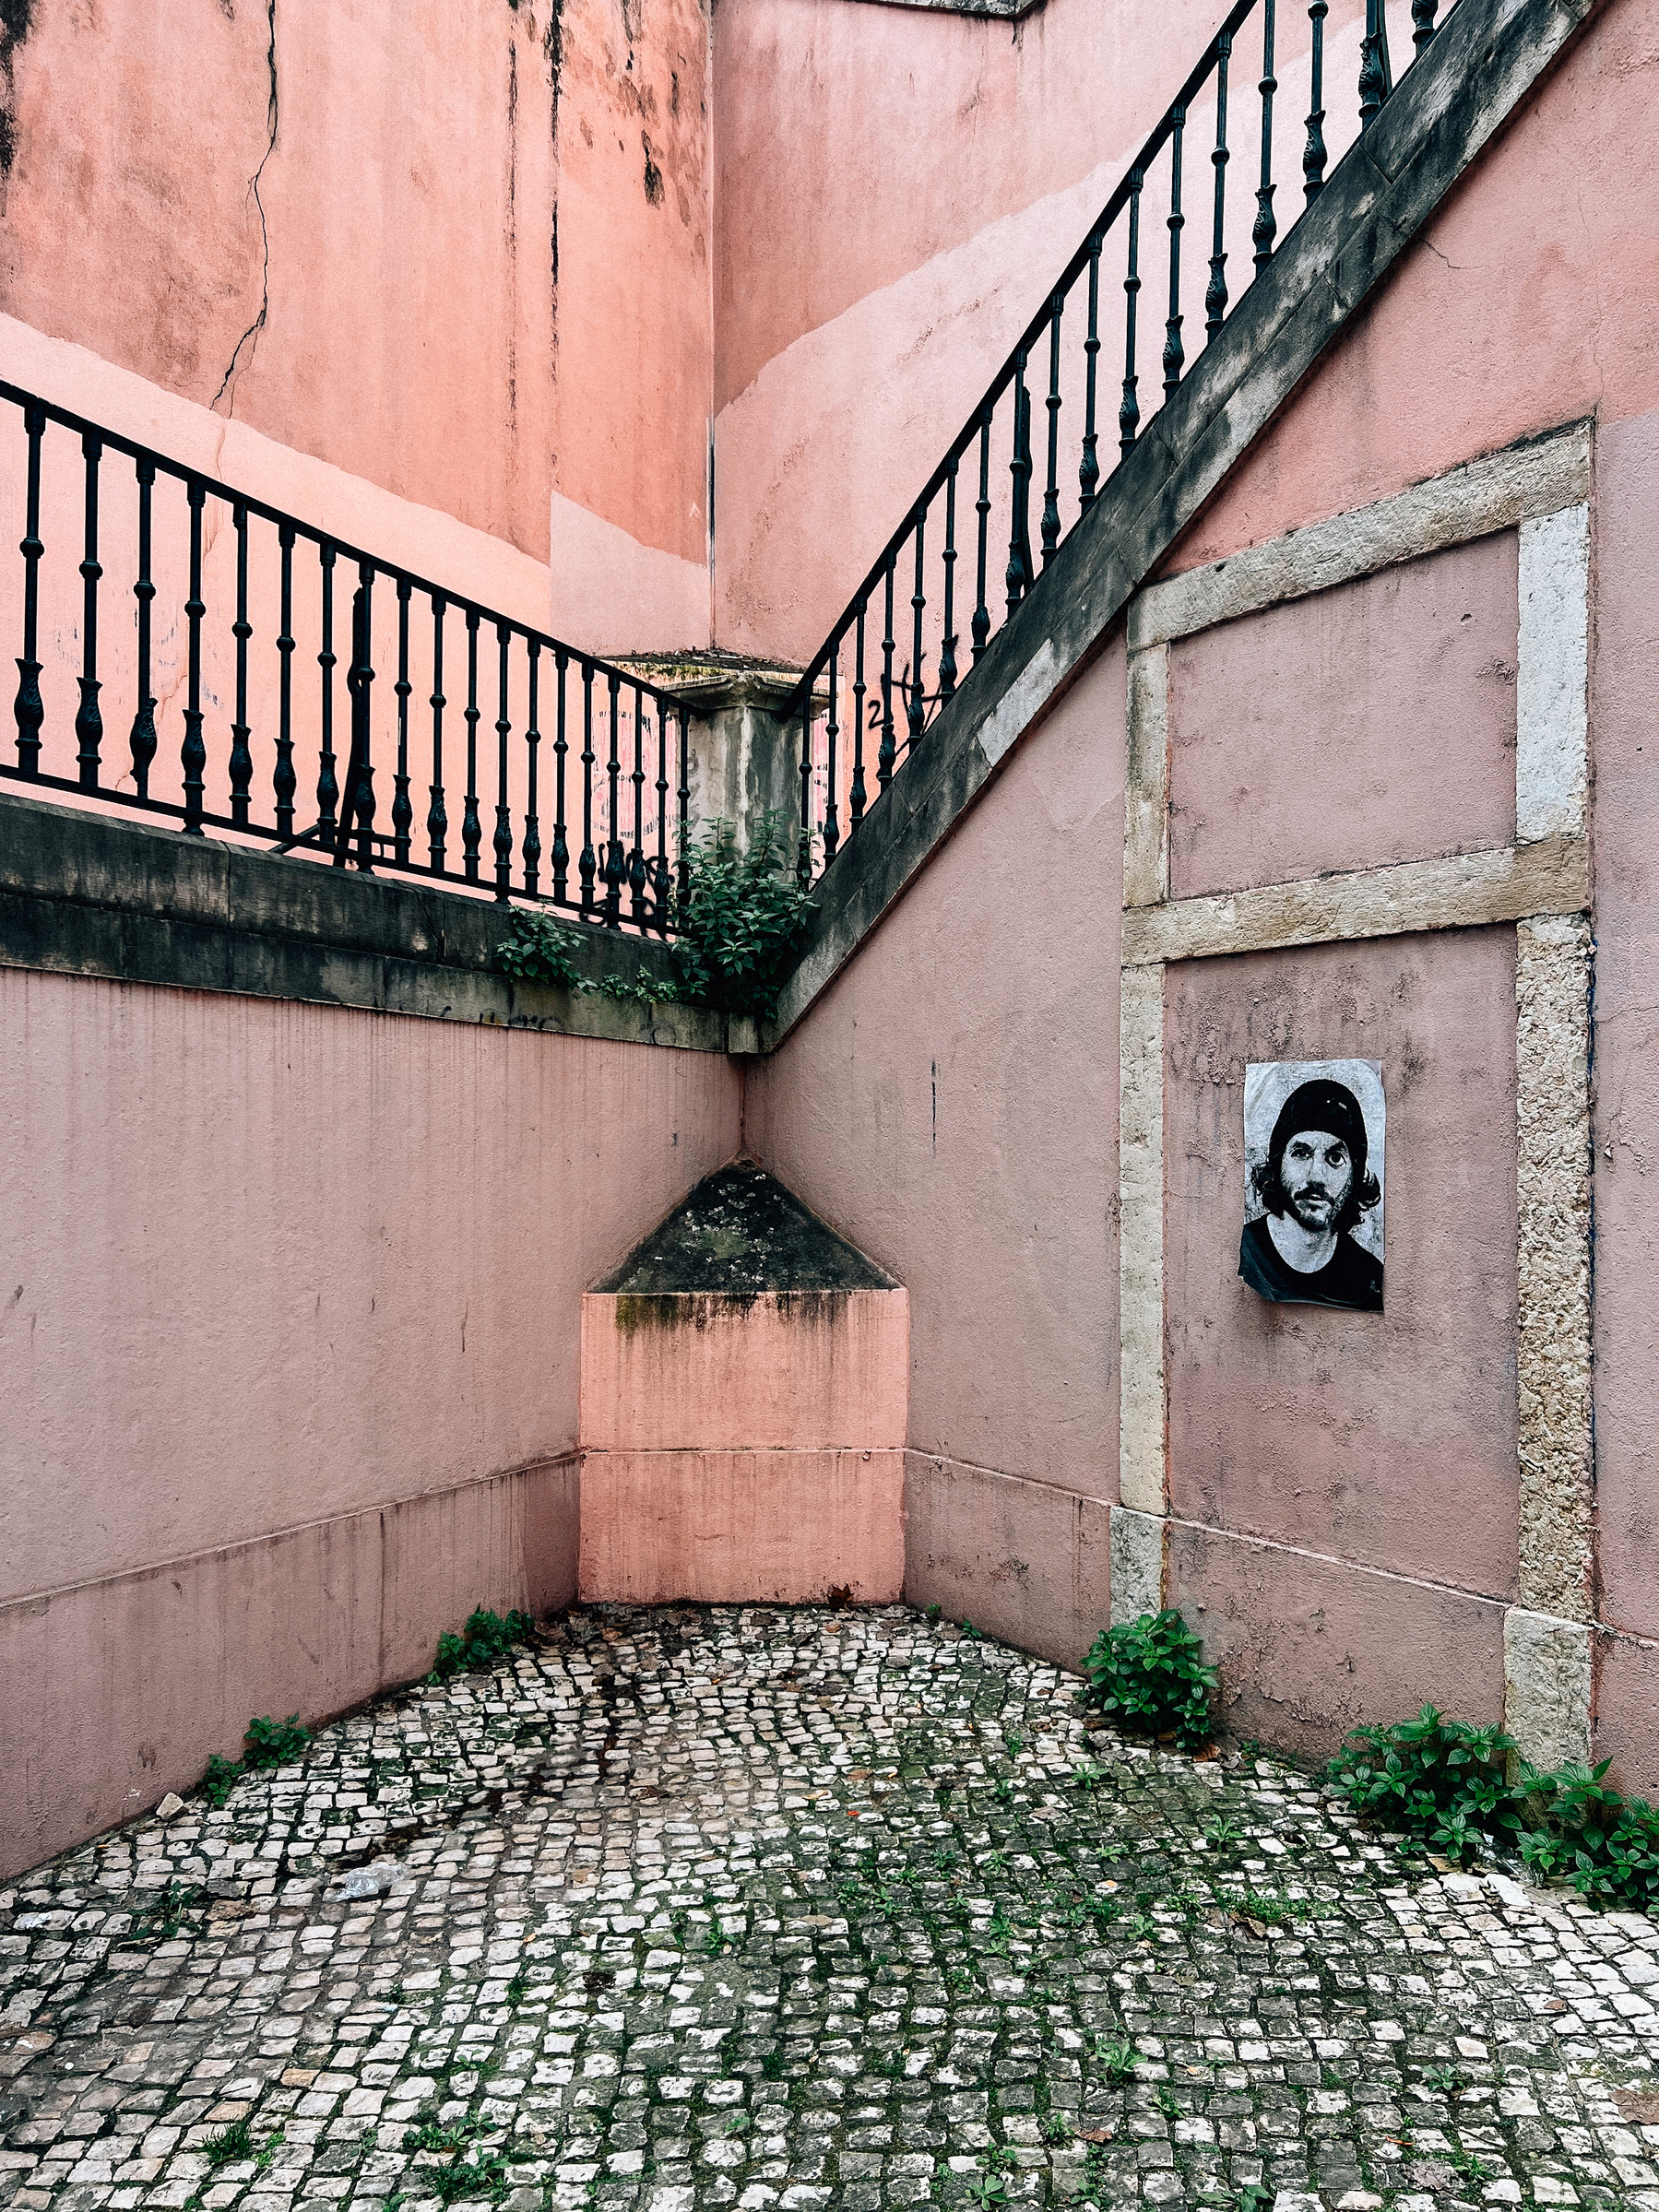 An outdoor corner of a building with weathered pink walls and a metal railing staircase. There&rsquo;s a black and white portrait posted on the wall and cobblestone pavement below.